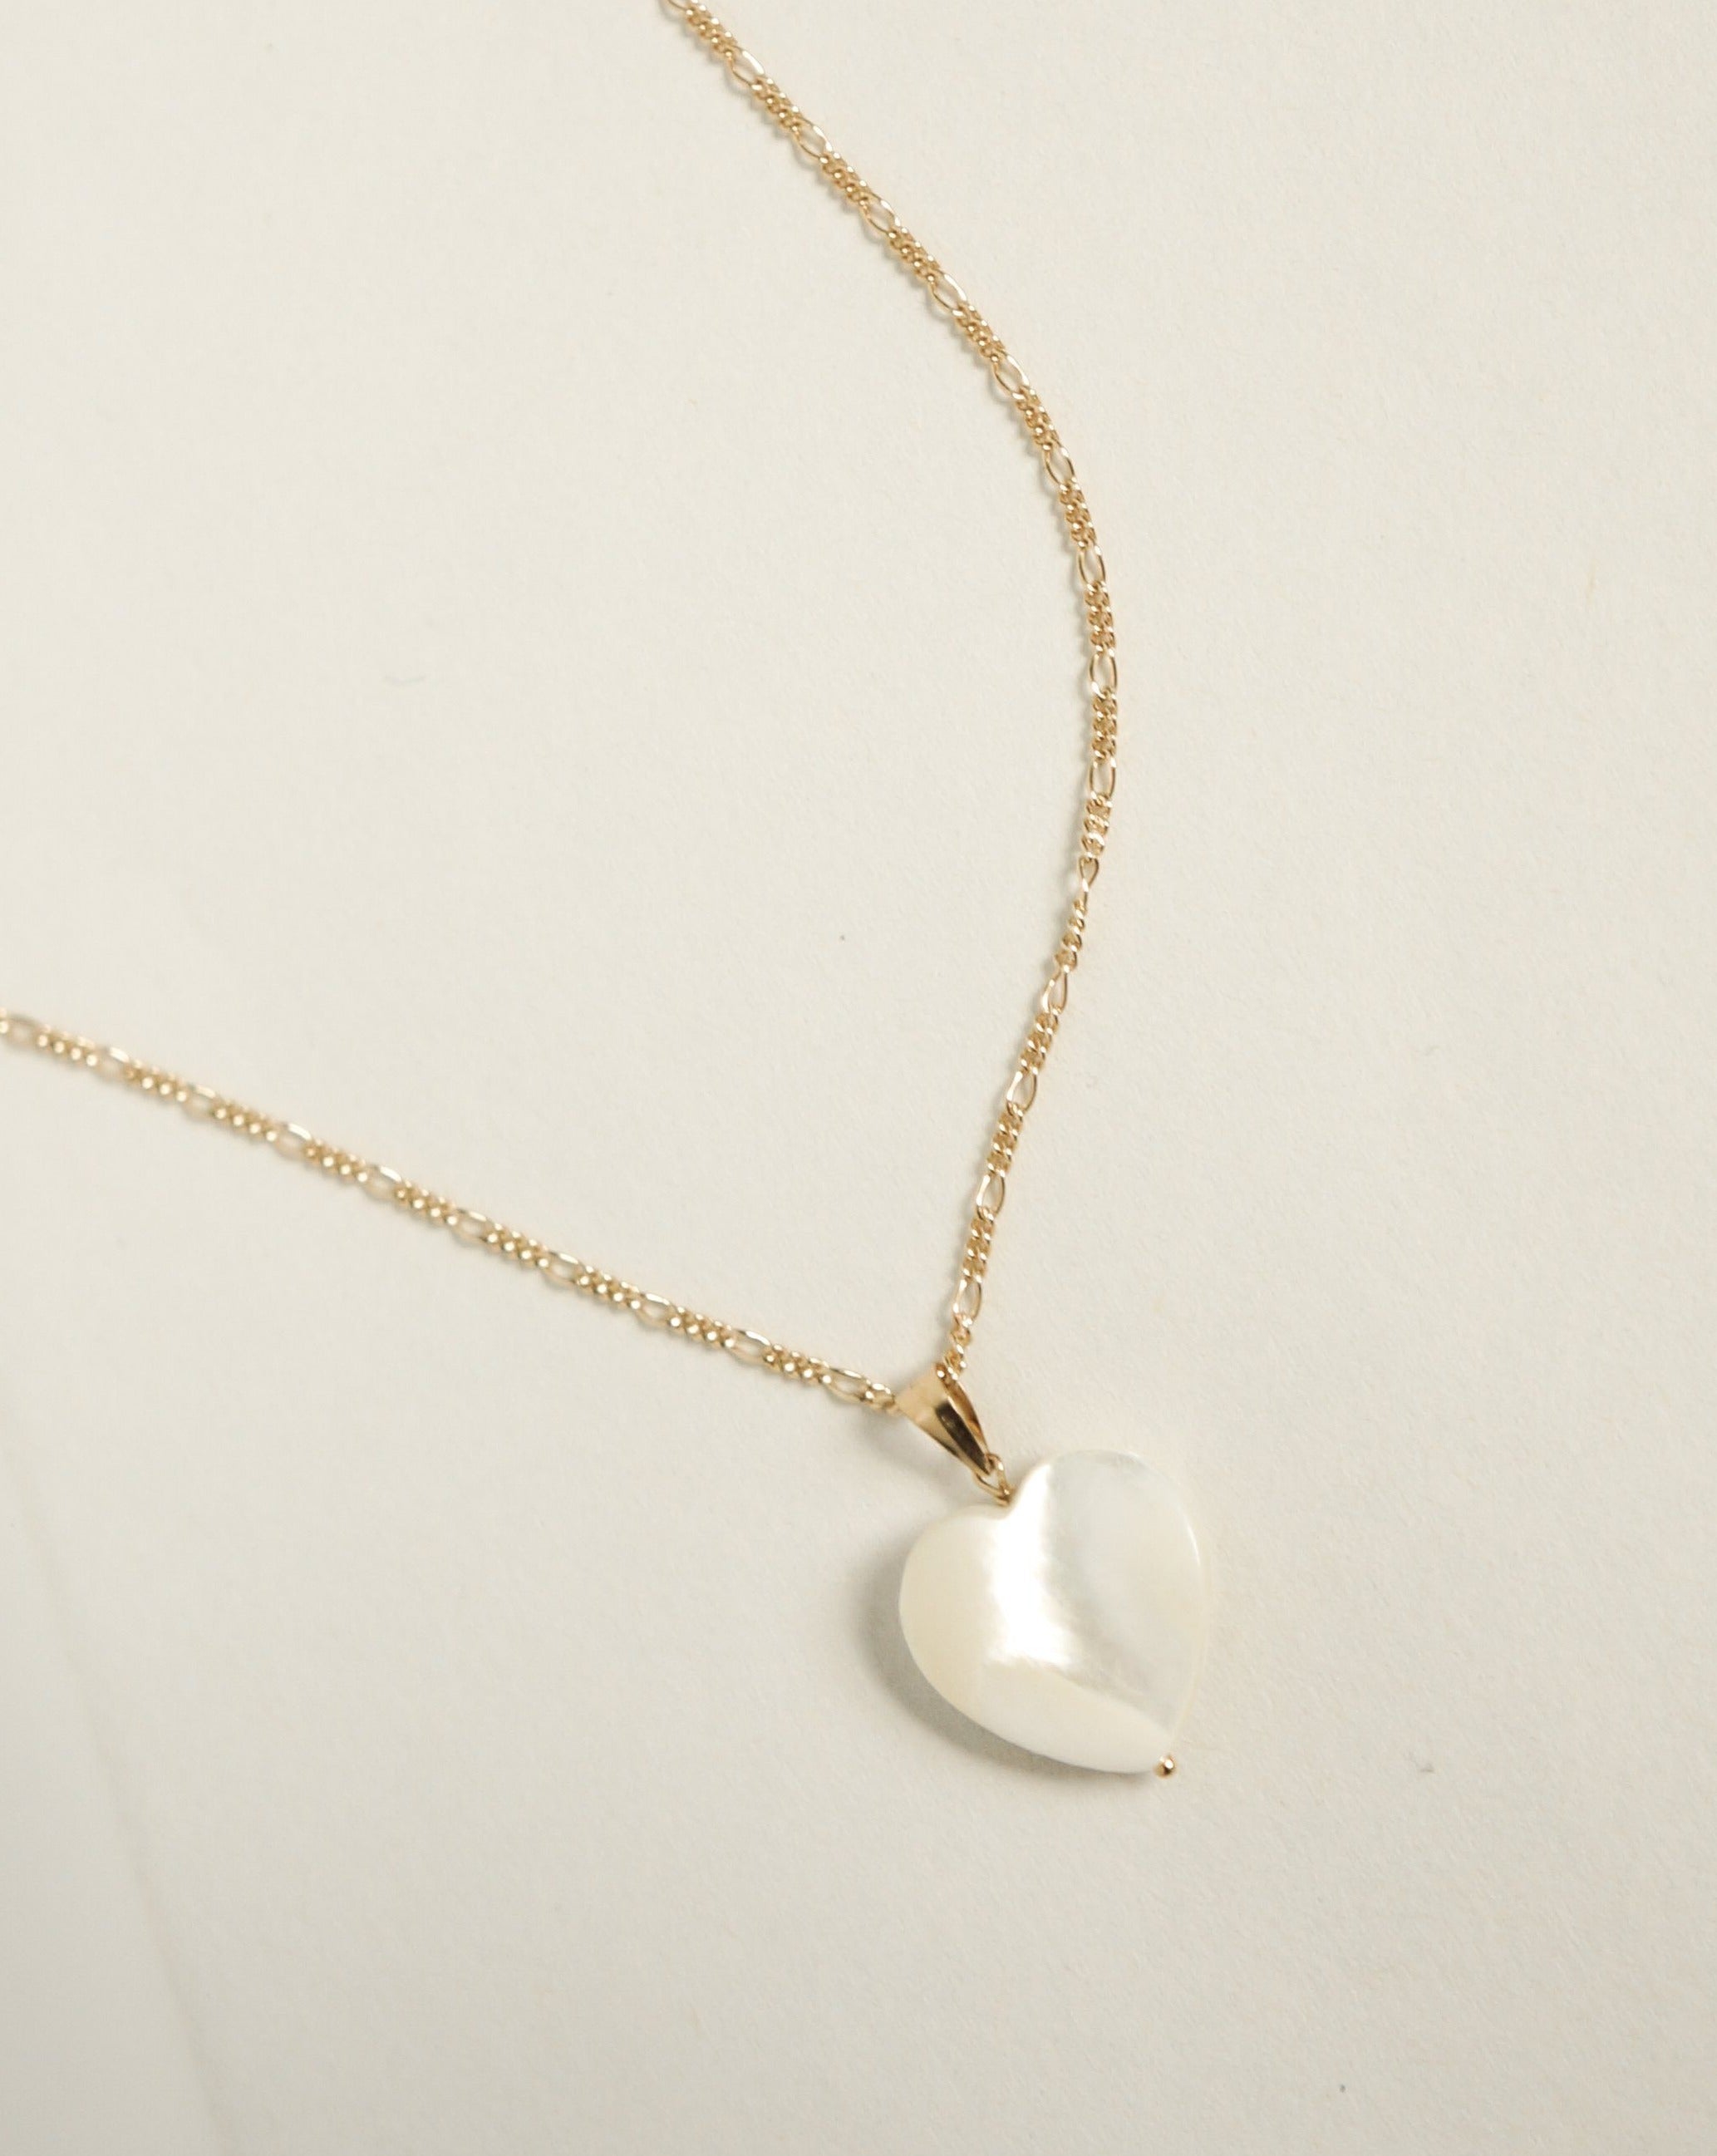 Heart Necklace by KOZAKH. A 16 to 18 inch adjustable length necklace in 14K Gold Filled, featuring a hand carved faceted Mother of Pearl heart charm.